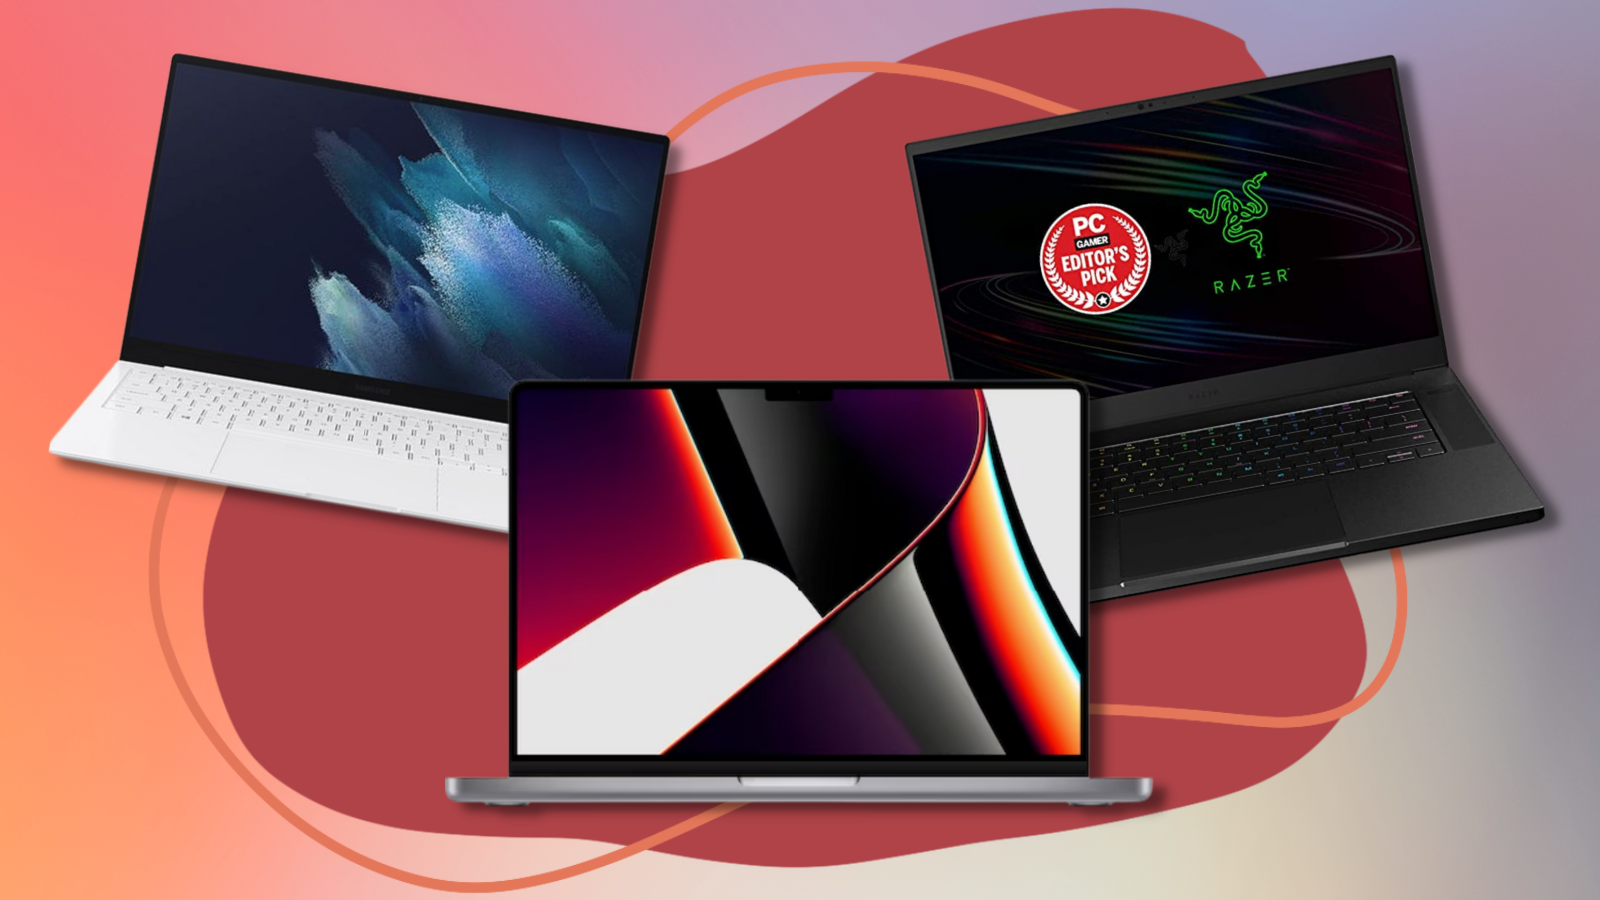 The best early Black Friday laptop deals include MacBooks, Galaxy Books, and more